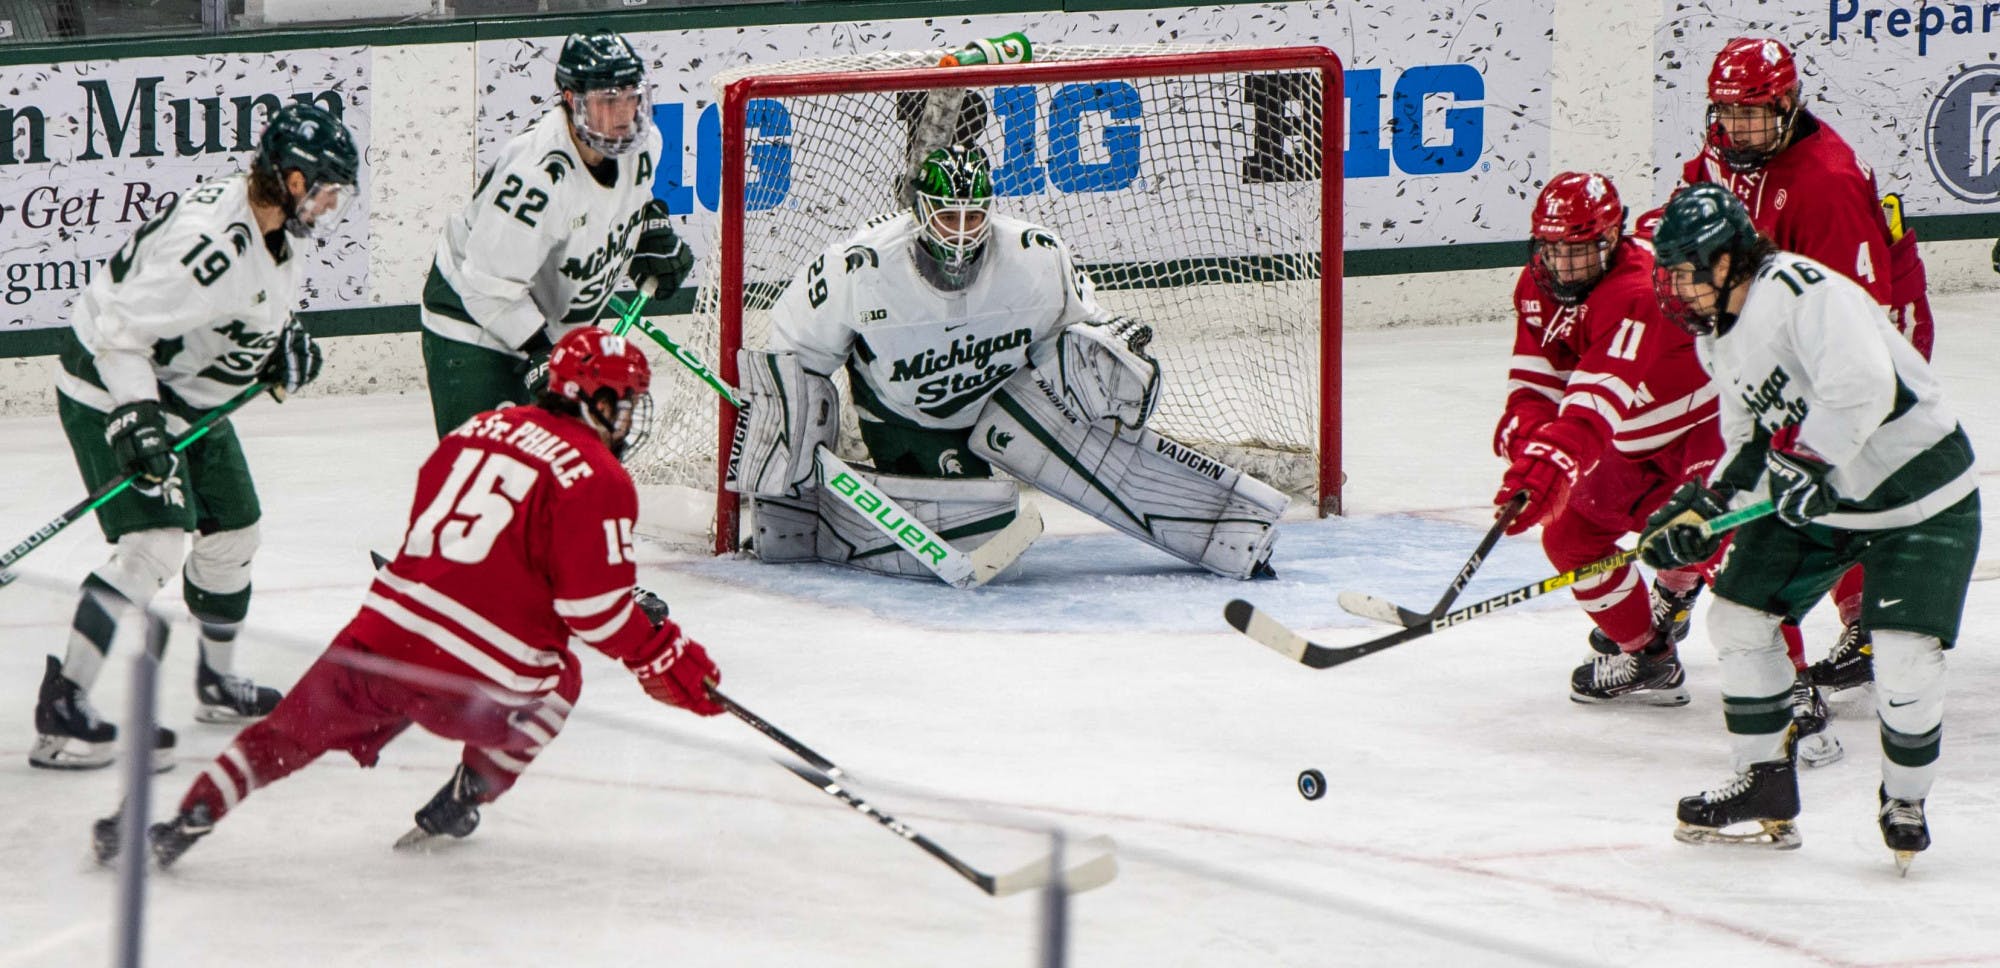 <p>Freshman goaltender Pierce Charleson (29) replaced DeRidder in the Michigan State goal early on in the game. The Badgers shut out the Spartans 4-0 at Munn Ice Arena on Mar. 5, 2021.</p>